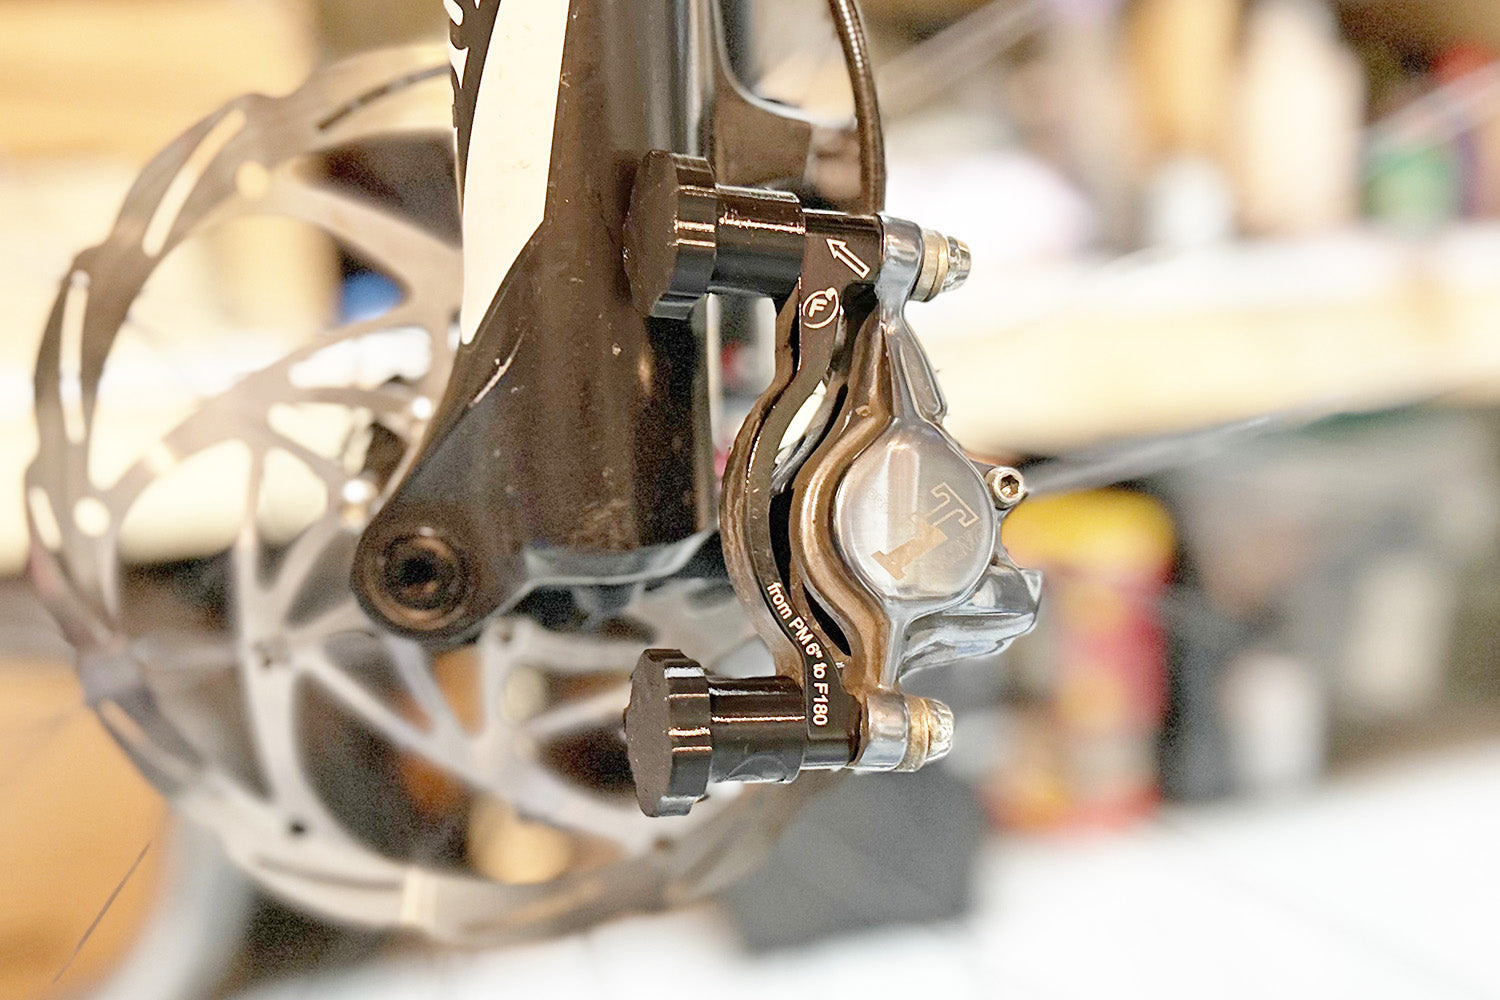 Momentutm Cycle's 3D printed Bolt Caliper Holders retaining all hardware on a MTB hydraulic brake system.